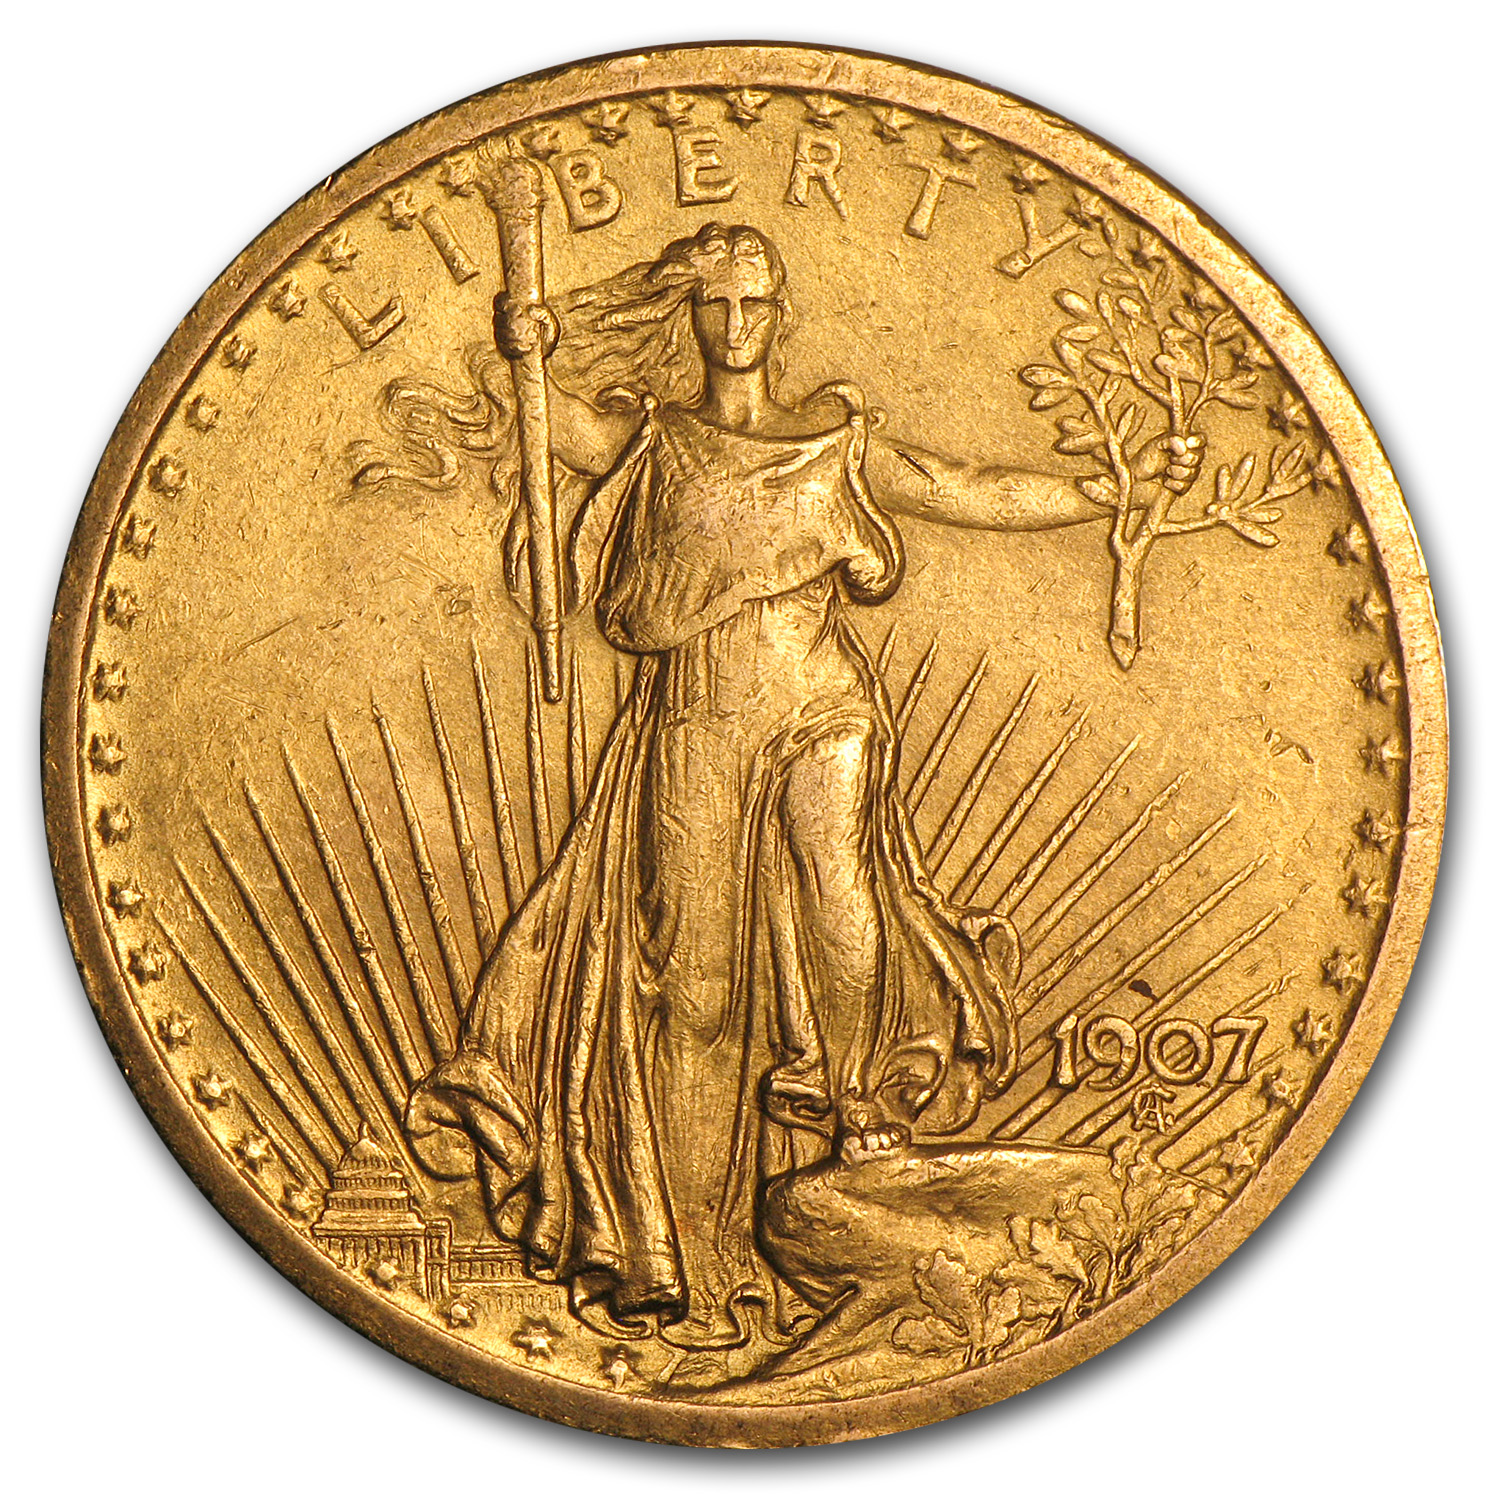 Buy 1907 $20 Saint-Gaudens Gold Double Eagle (Cleaned)